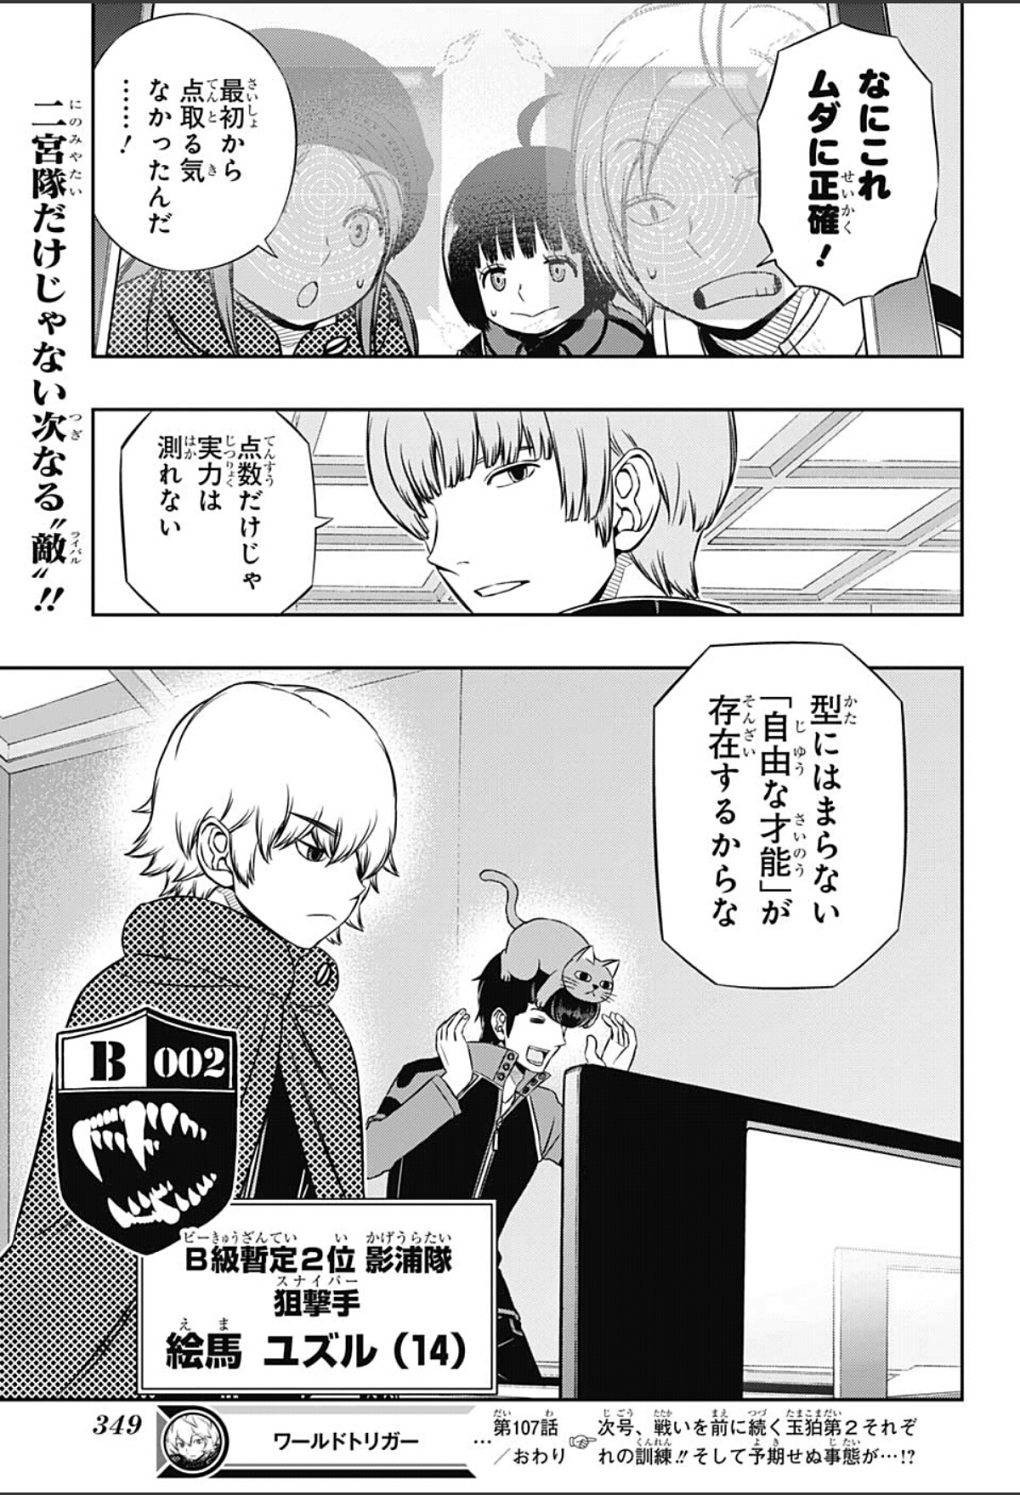 World Trigger - Chapter 107 - Page 19